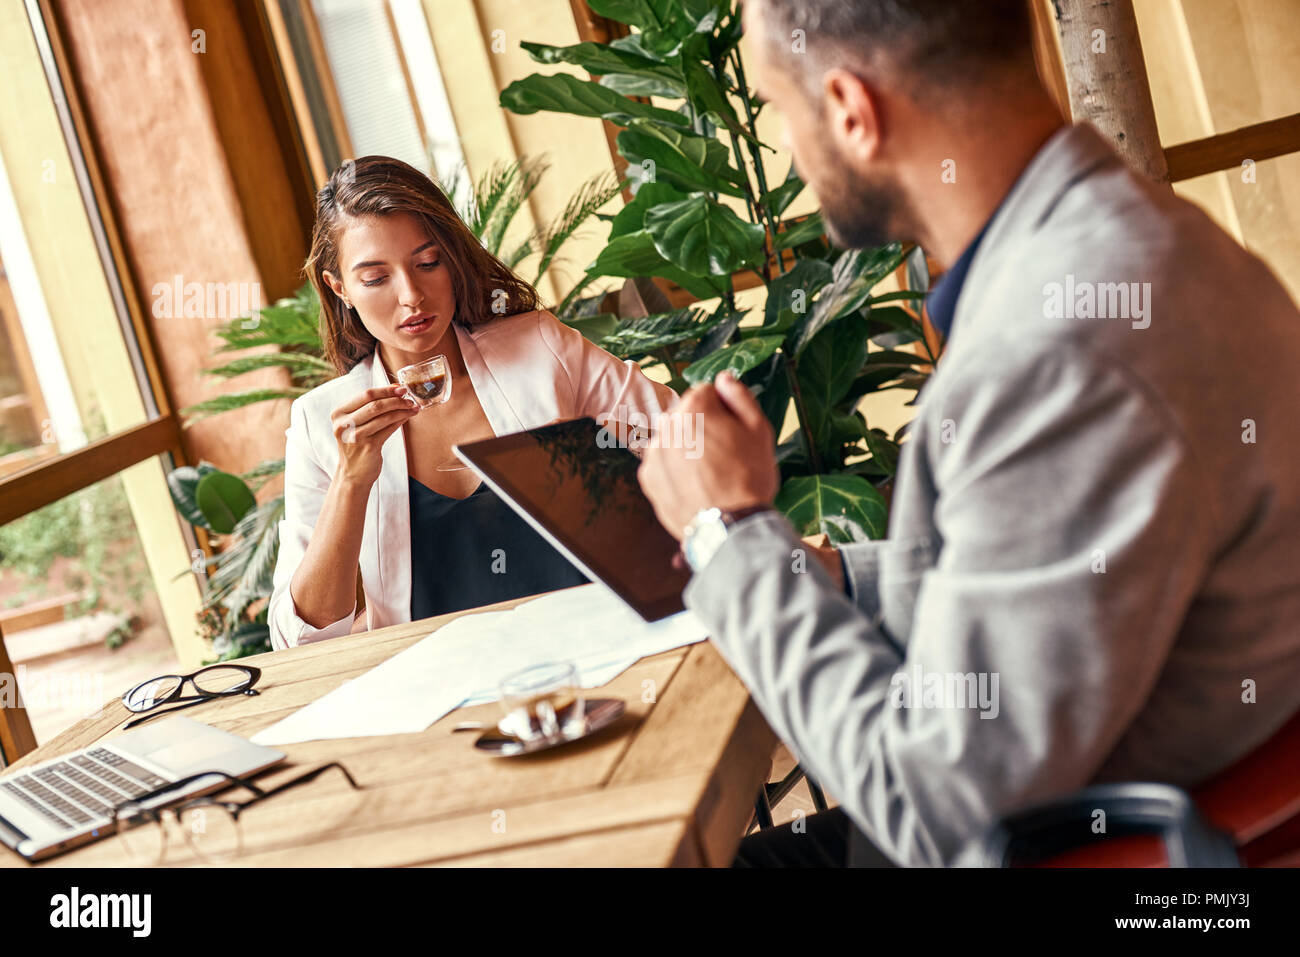 Business lunch. Business people sitting at table at restaurant drinking coffee talking close-up Stock Photo